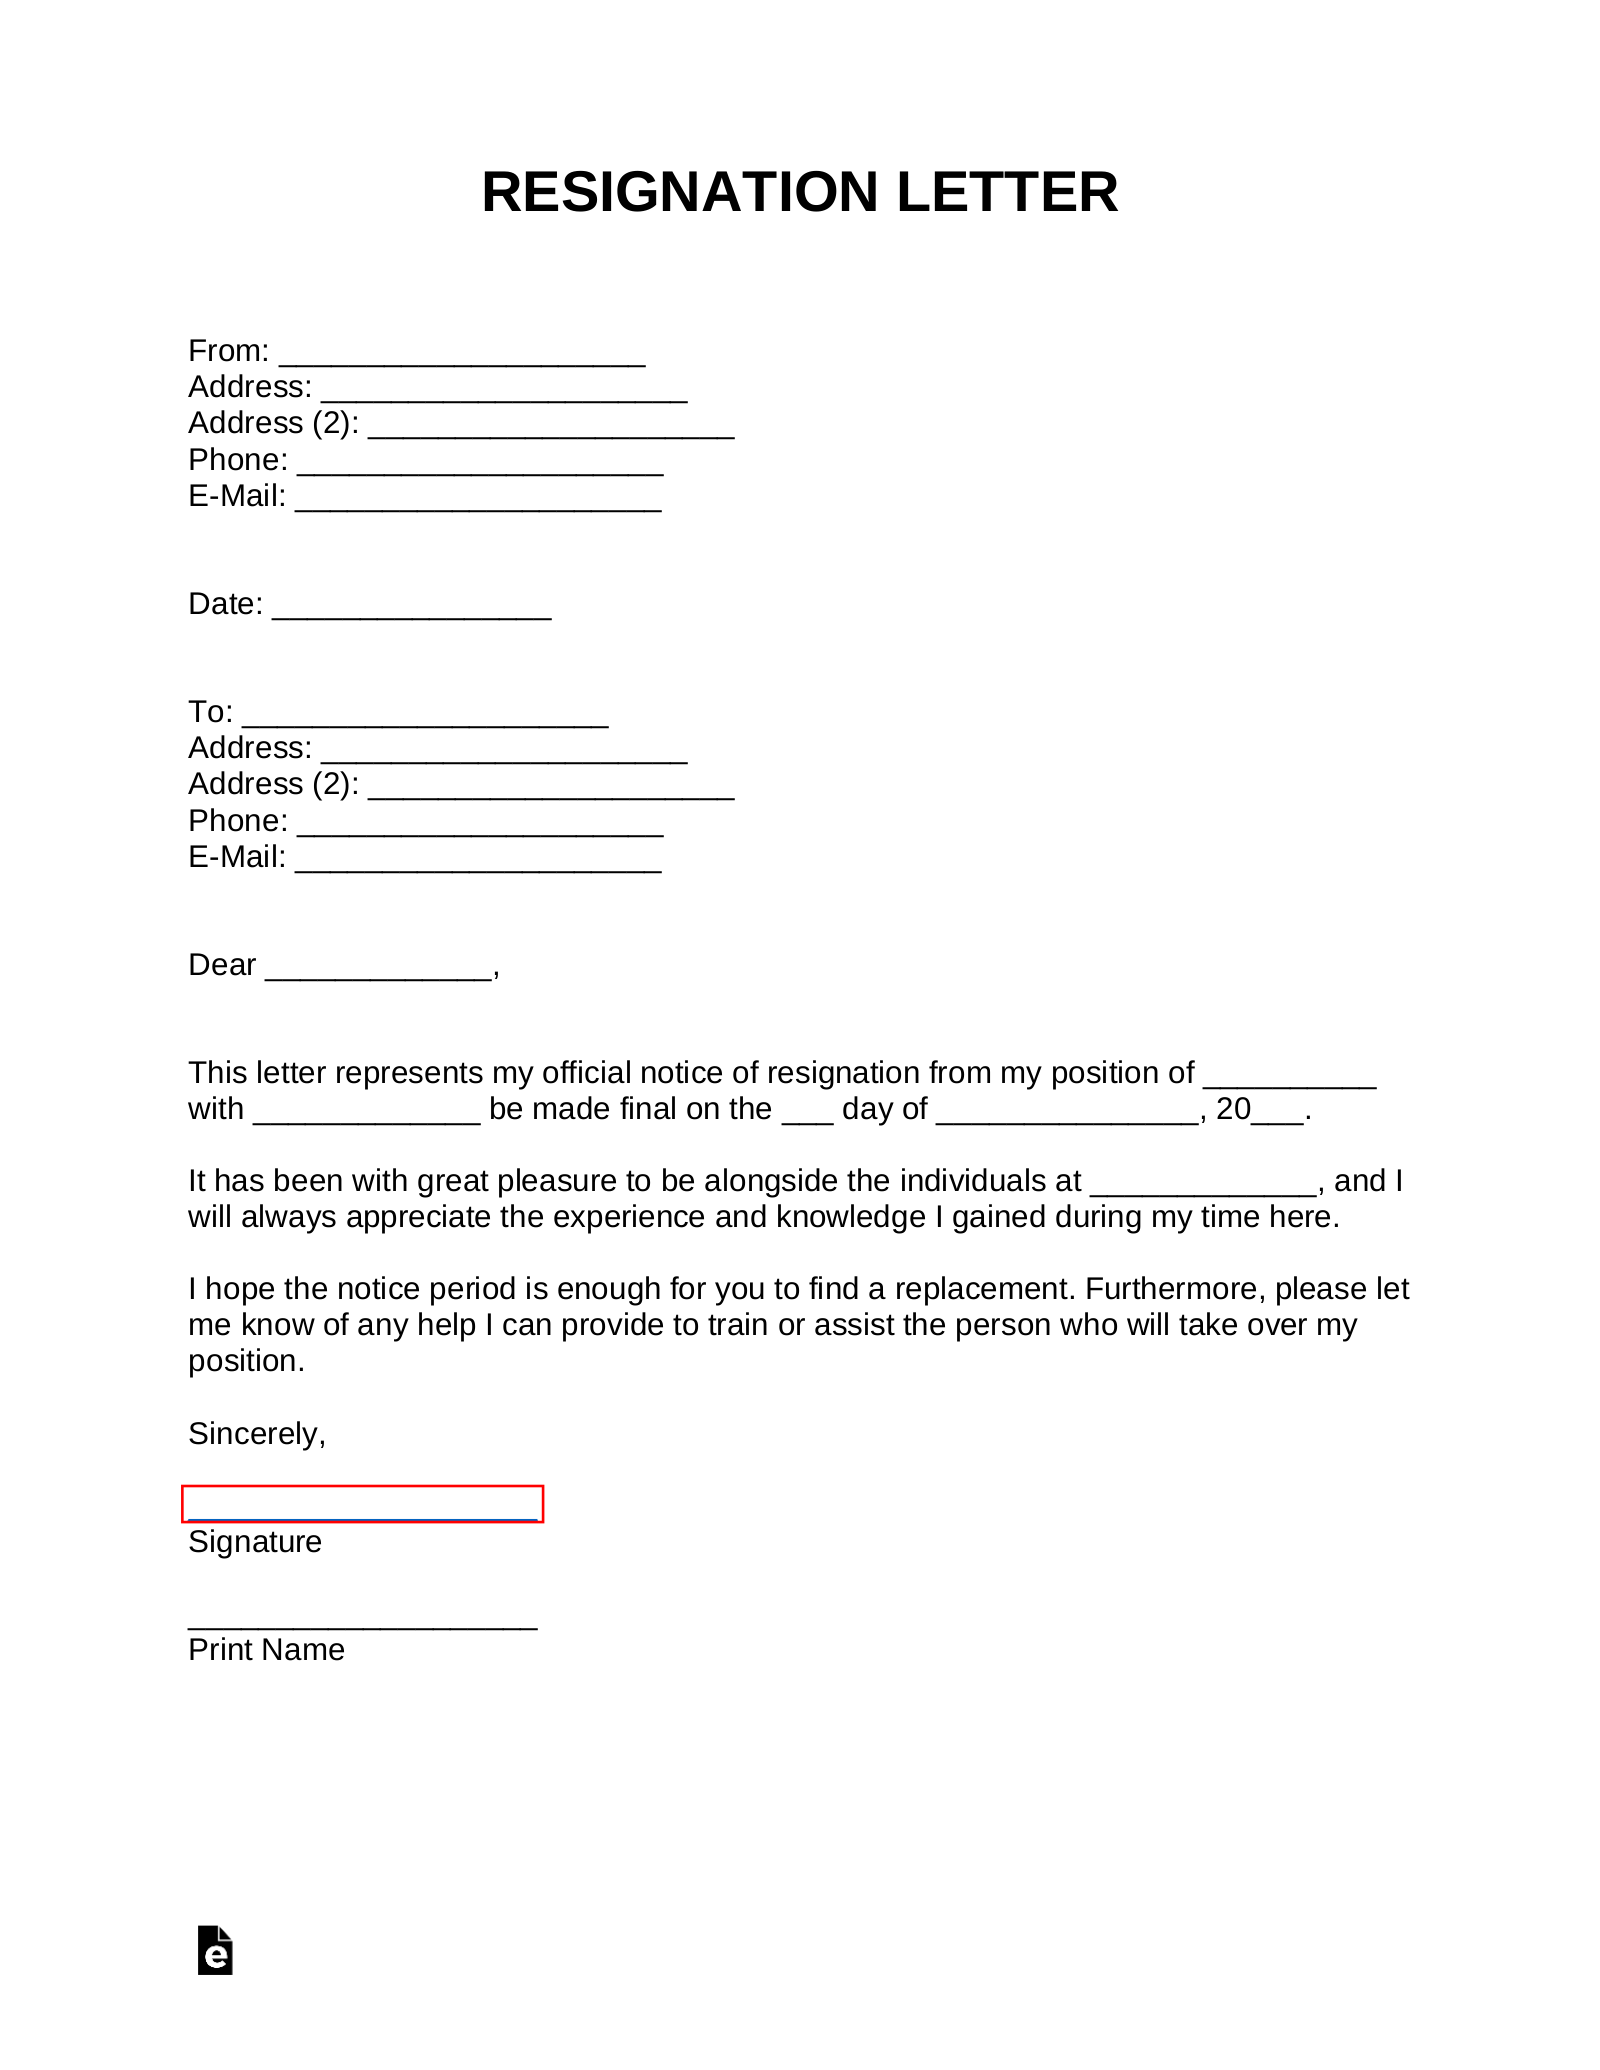 Letter Of Resignation Template Doc from eforms.com